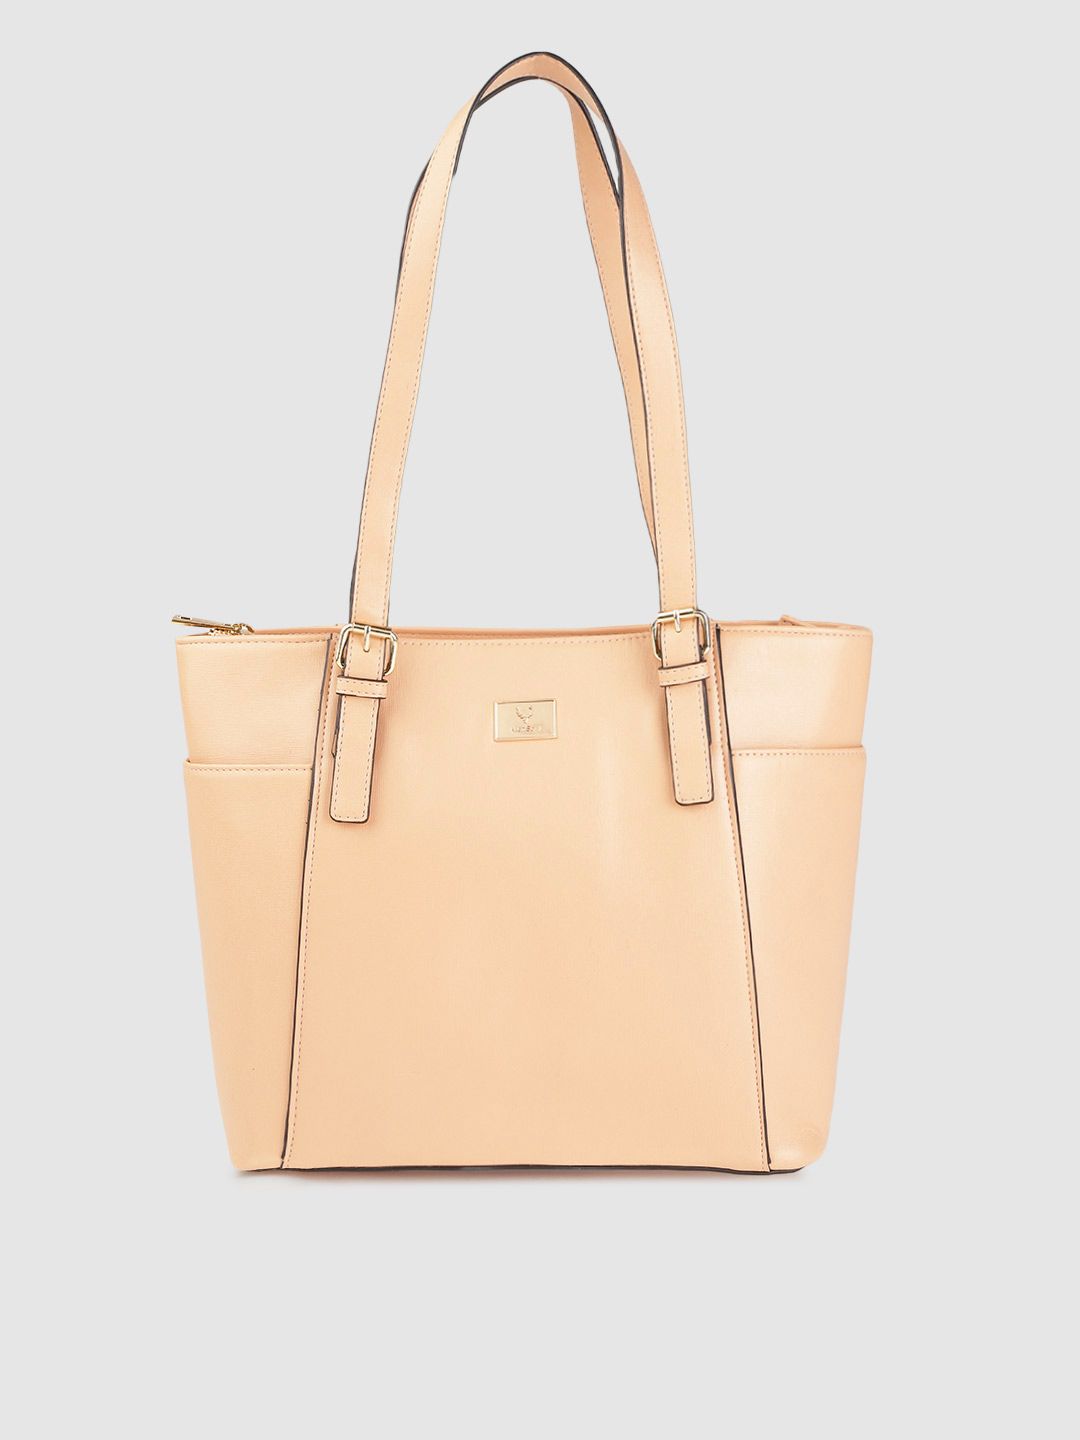 Allen Solly Nude-Coloured Structured Shoulder Bag Price in India